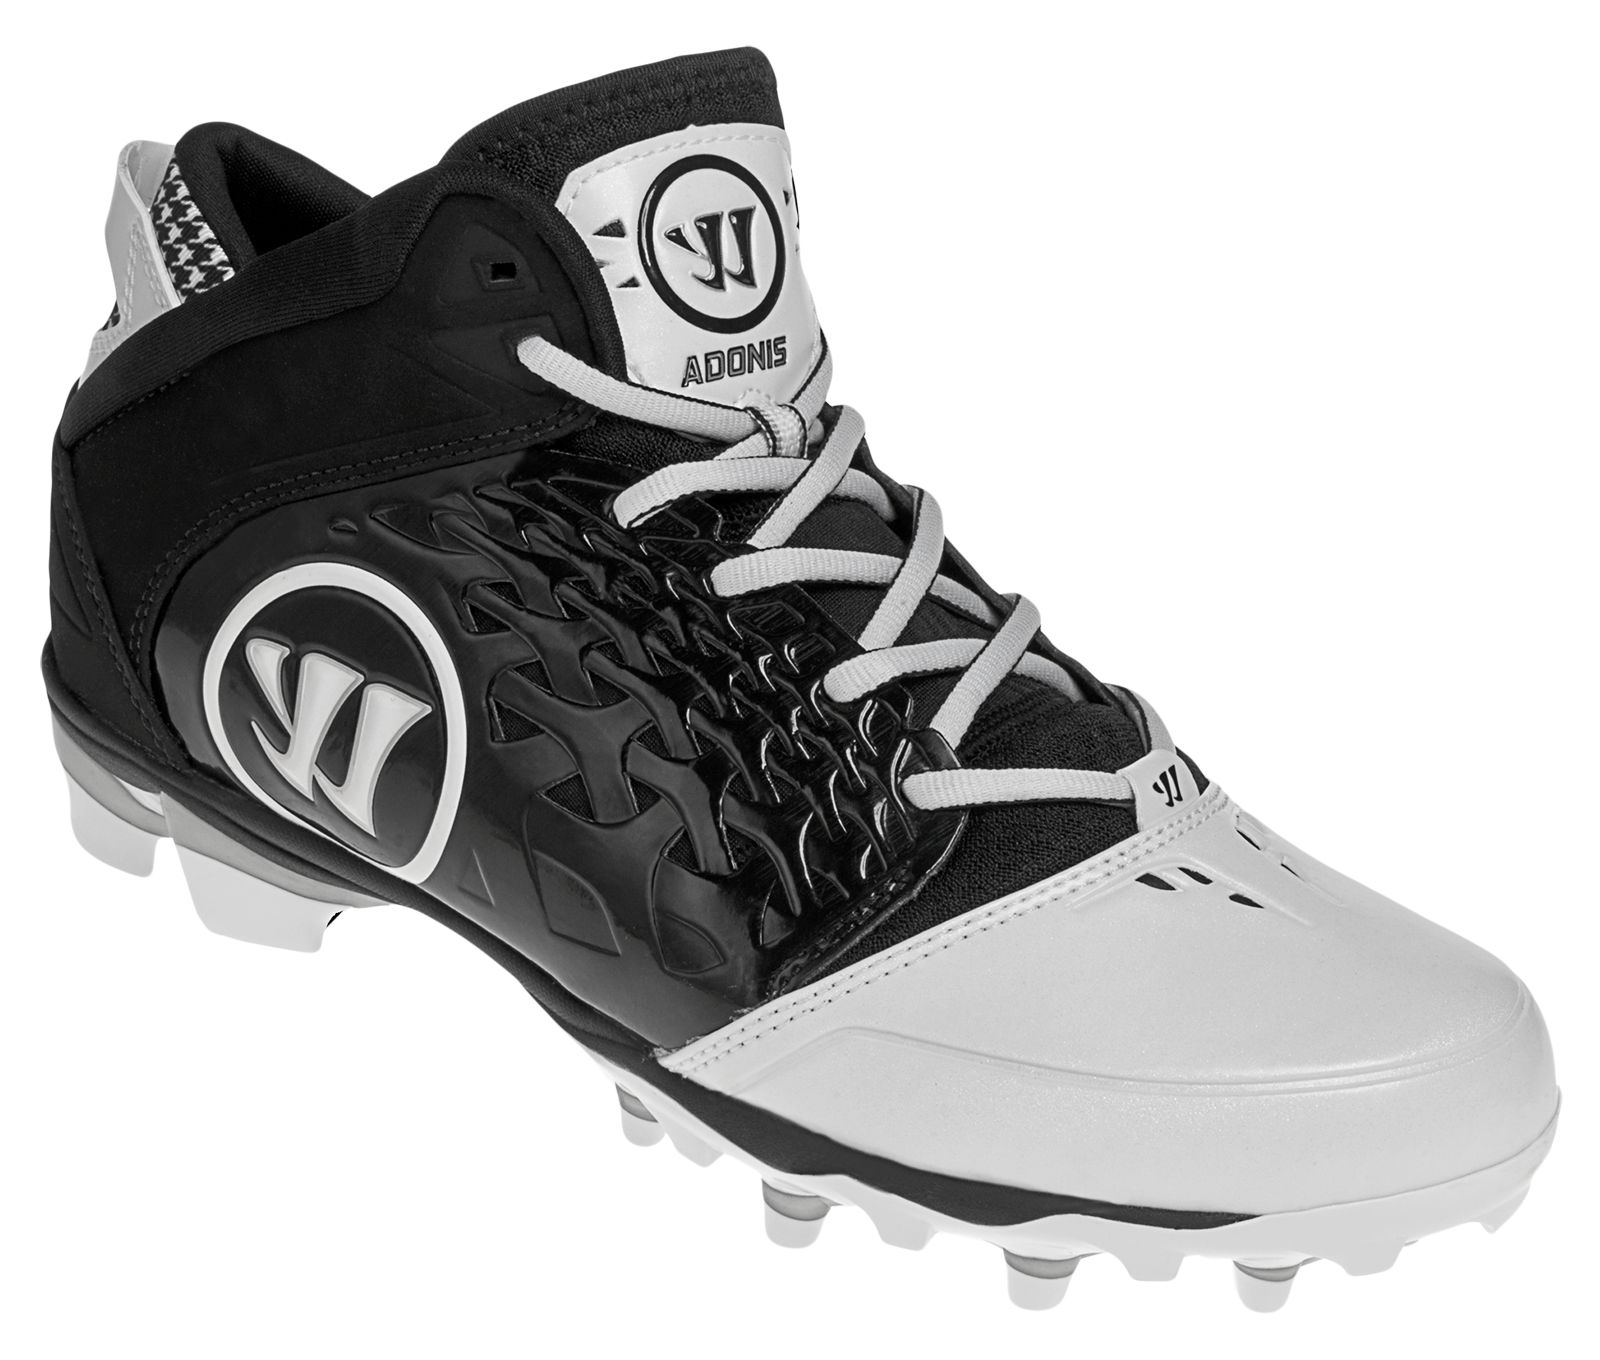 Adonis Cleat, White with Black image number 6